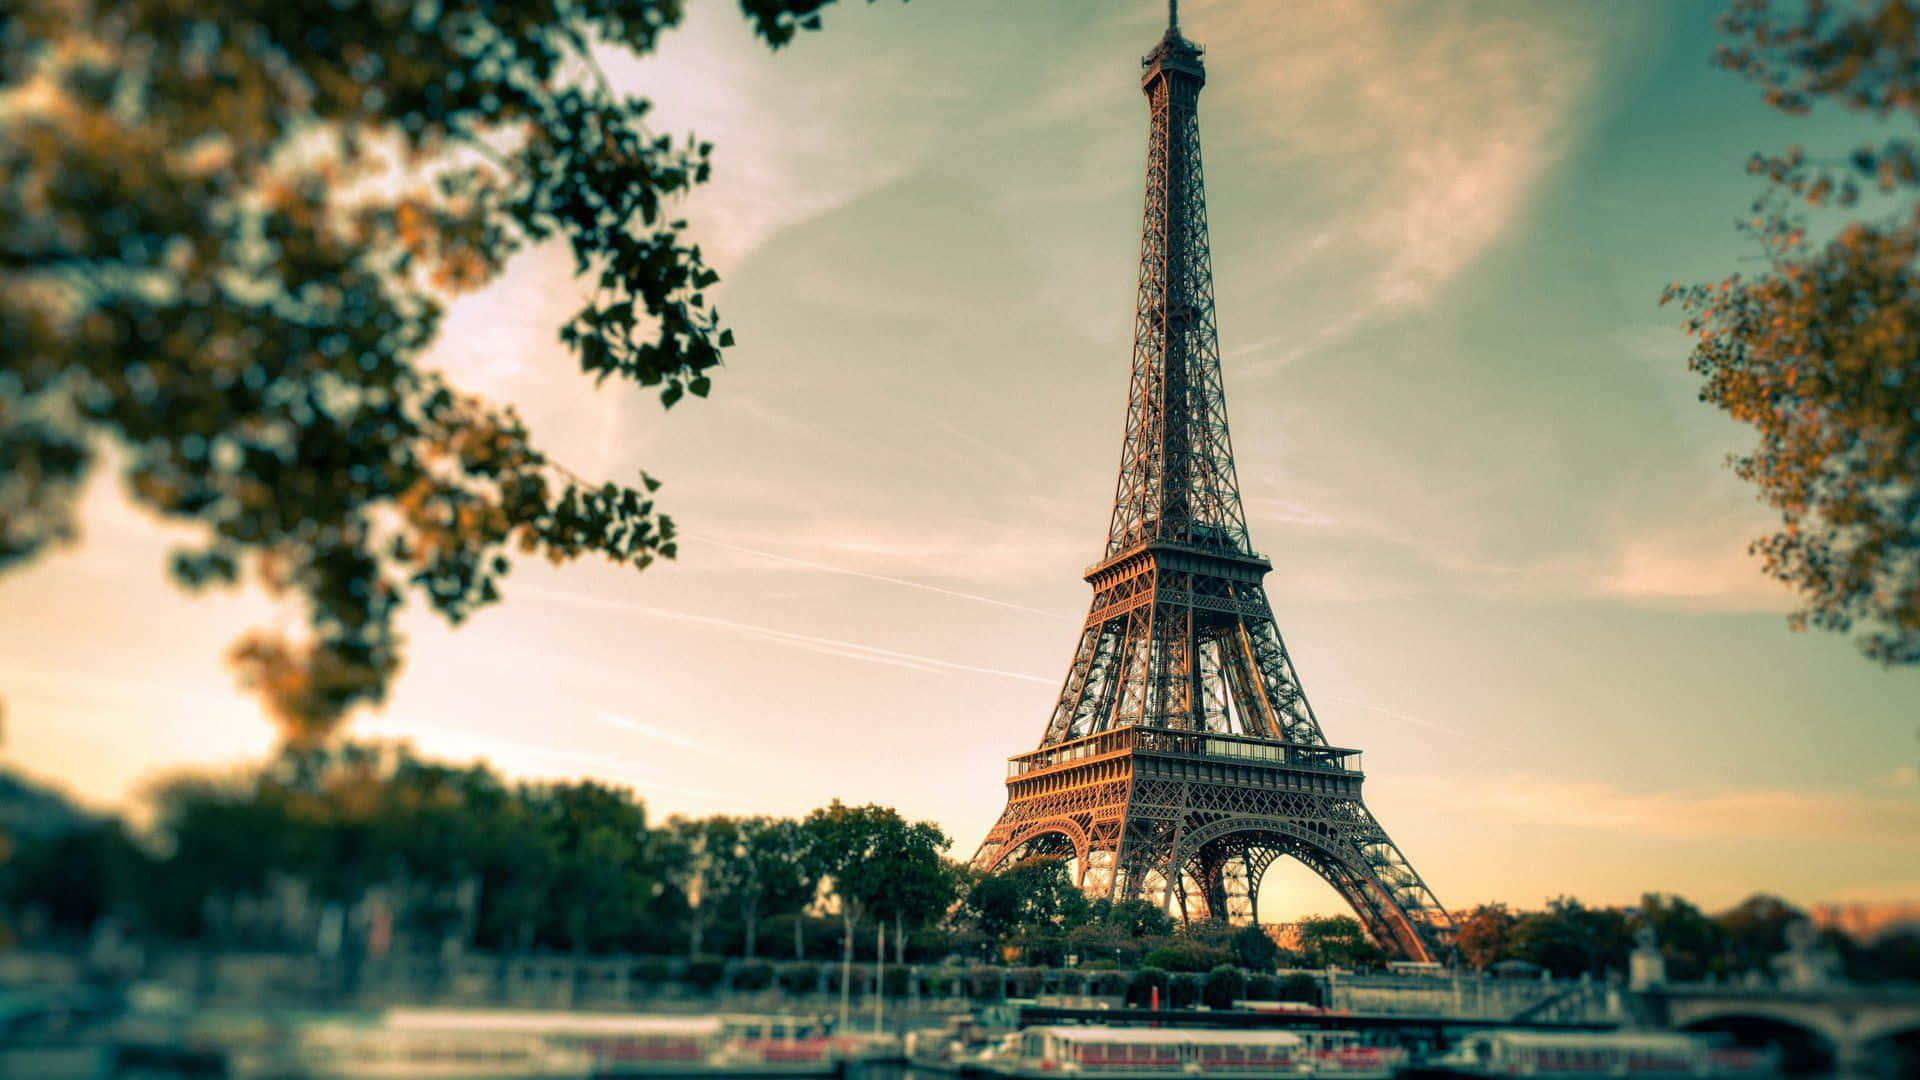 View of the beautiful Eiffel Tower in sunny Paris, France Wallpaper